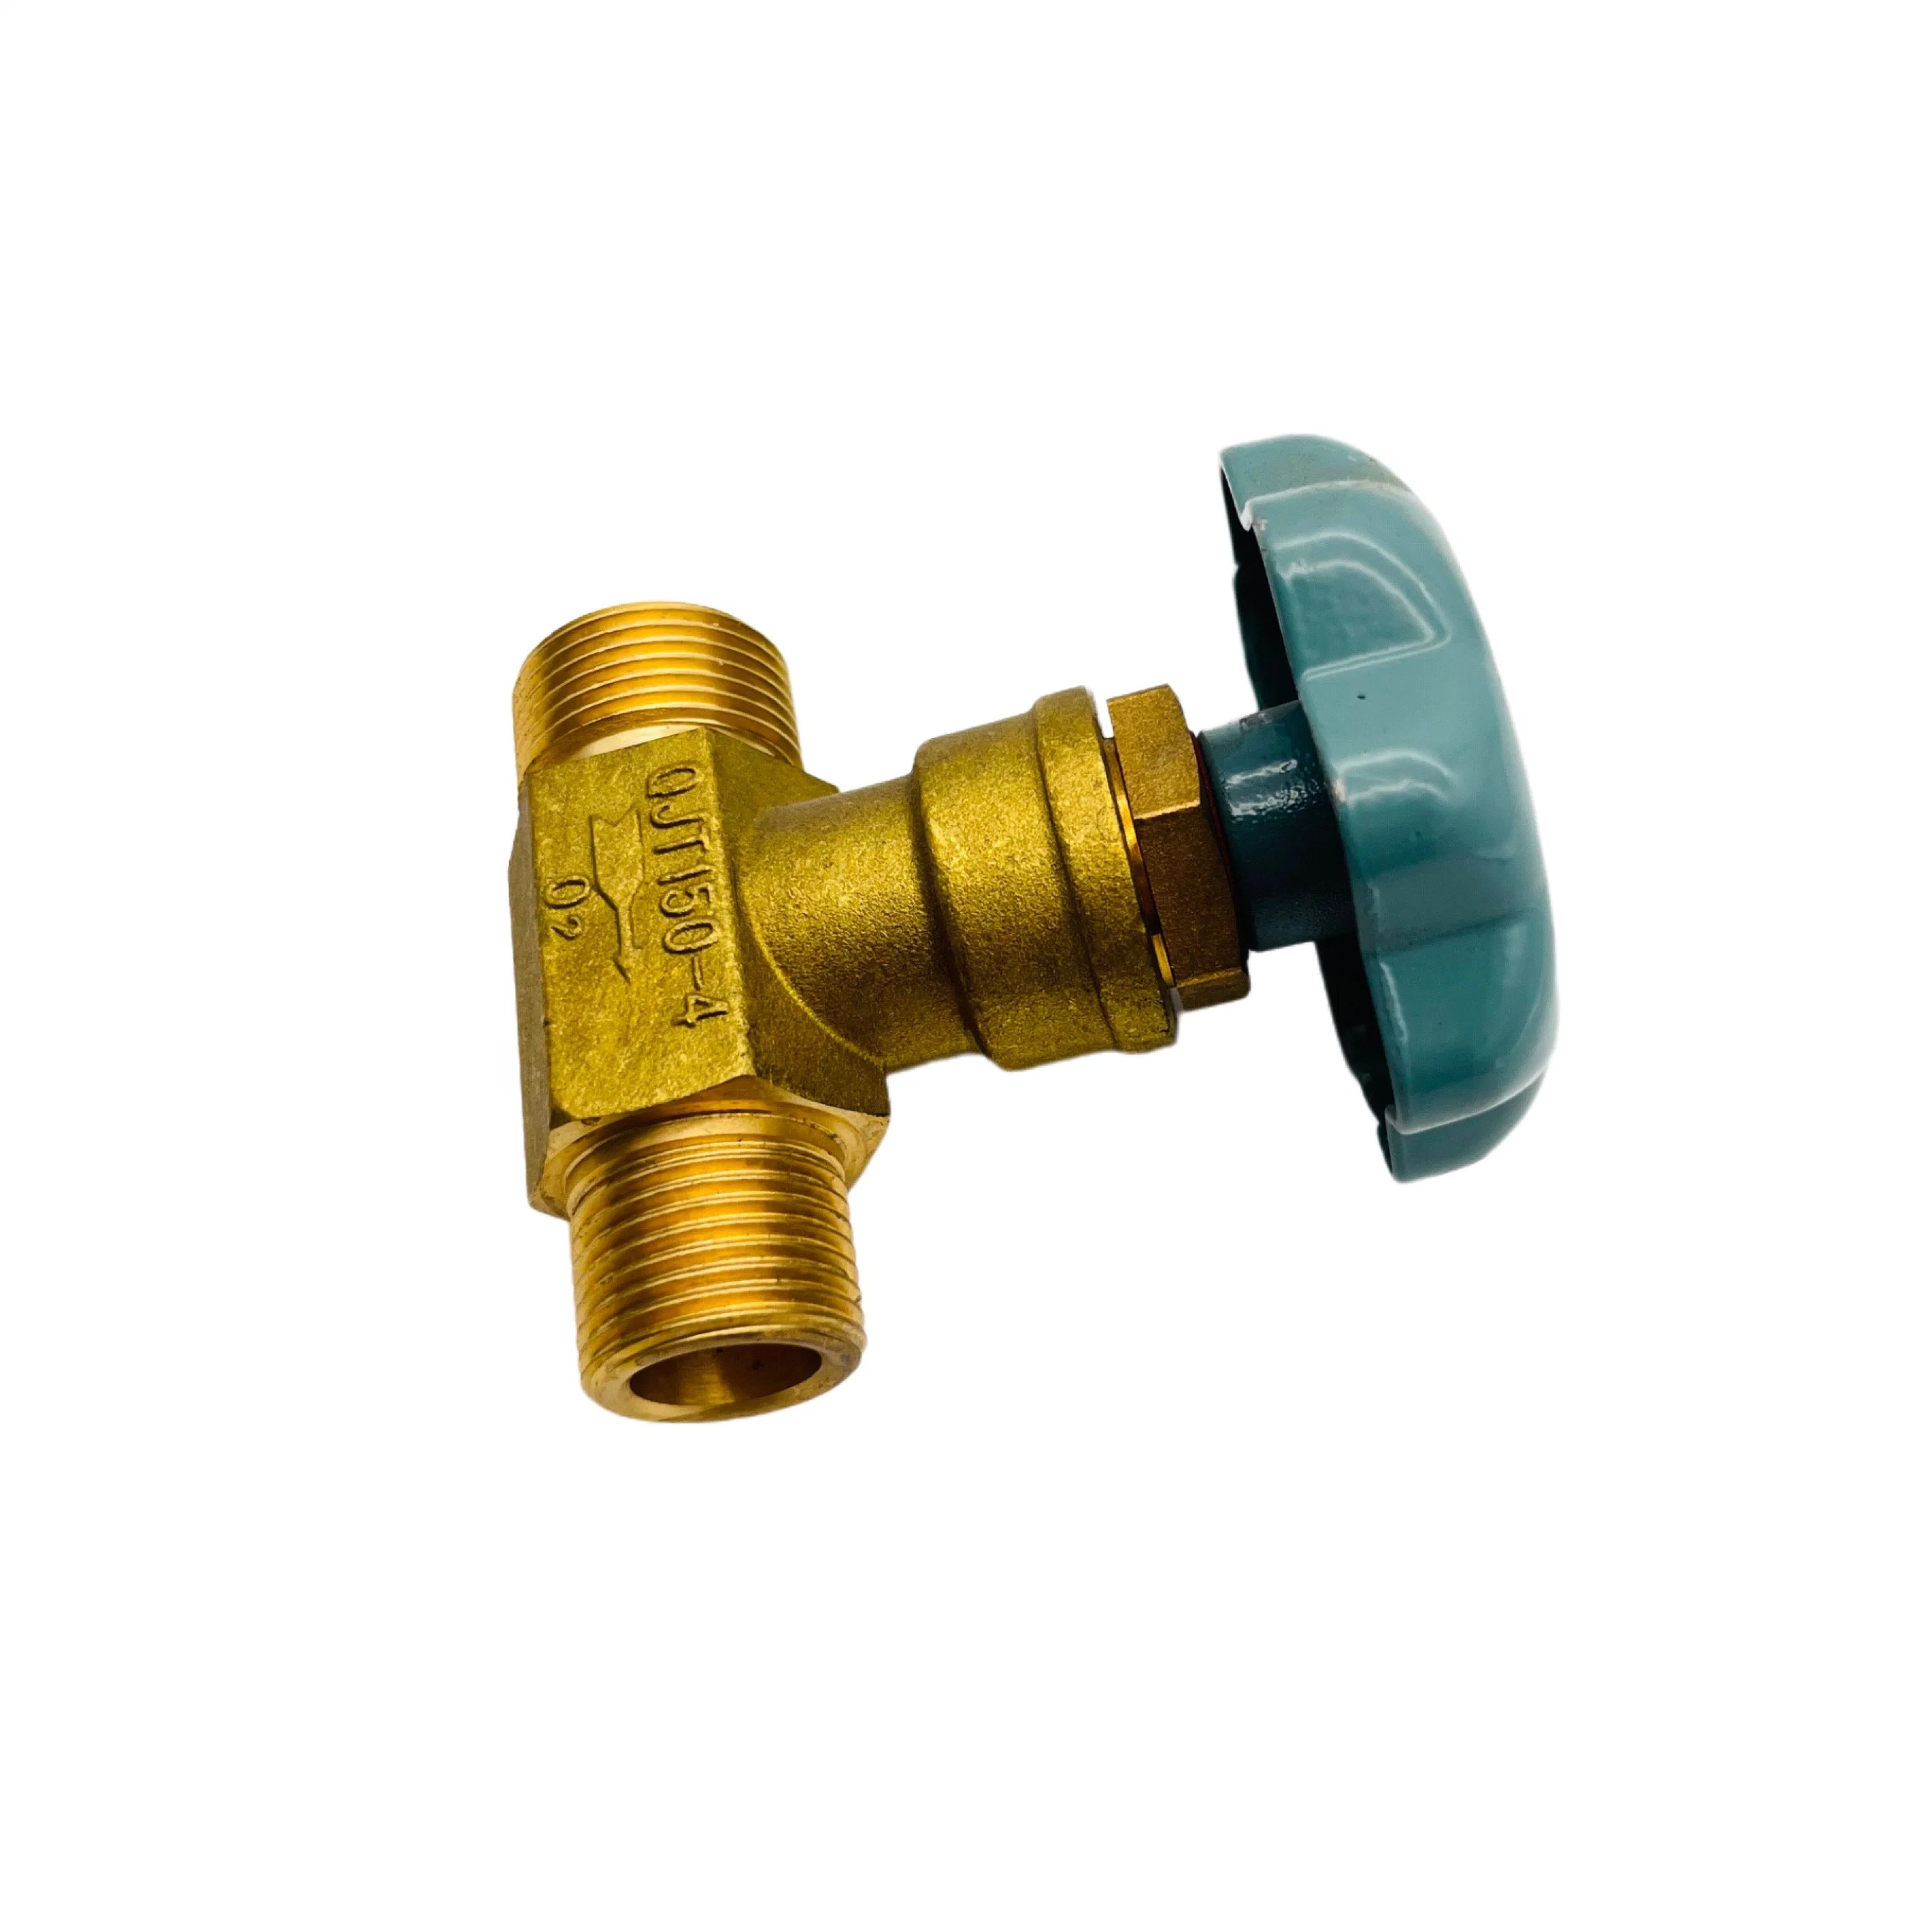 Straight Through Internal Thread Connection Stop Valve Qjt150-4 for Pipeline